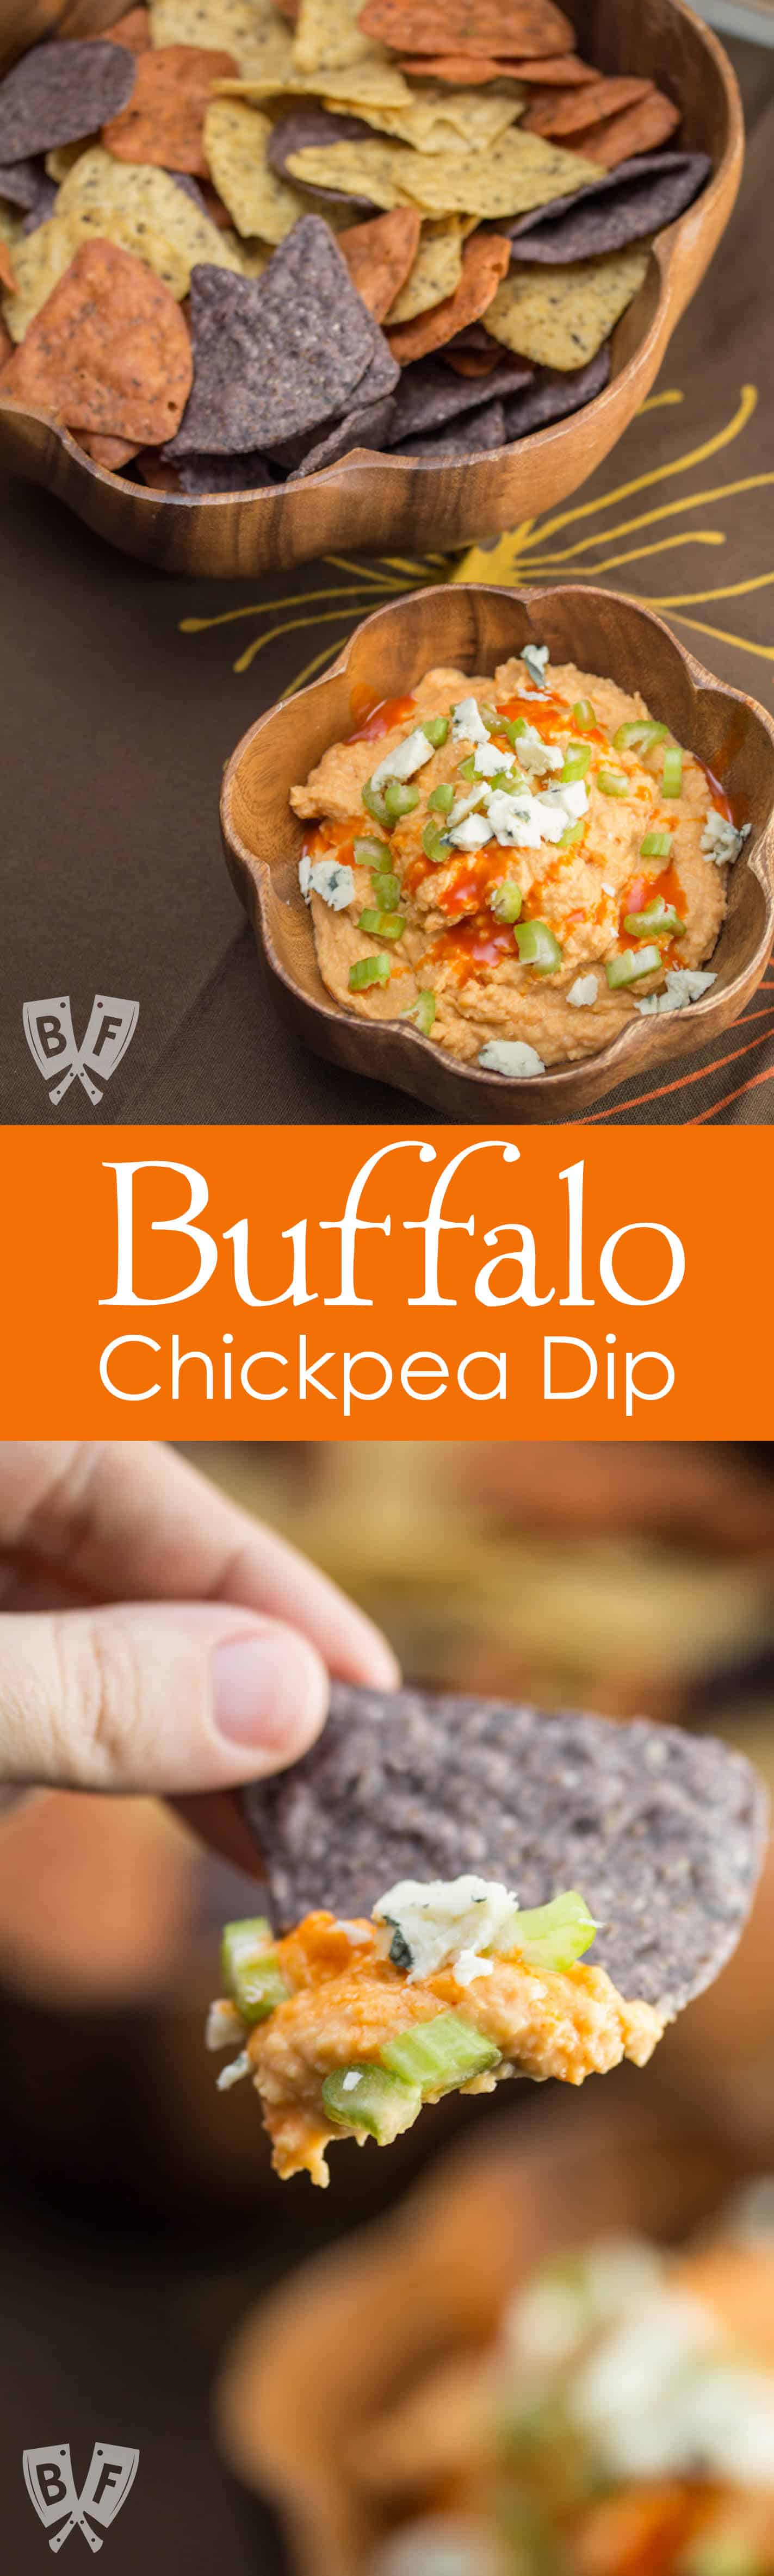 Buffalo Chickpea Dip: Two of the most in demand Super Bowl snacks have to be Buffalo wings and hummus. But why pick between spicy and smooth when you can have the best of both worlds? #StonyfieldBlogger #ad